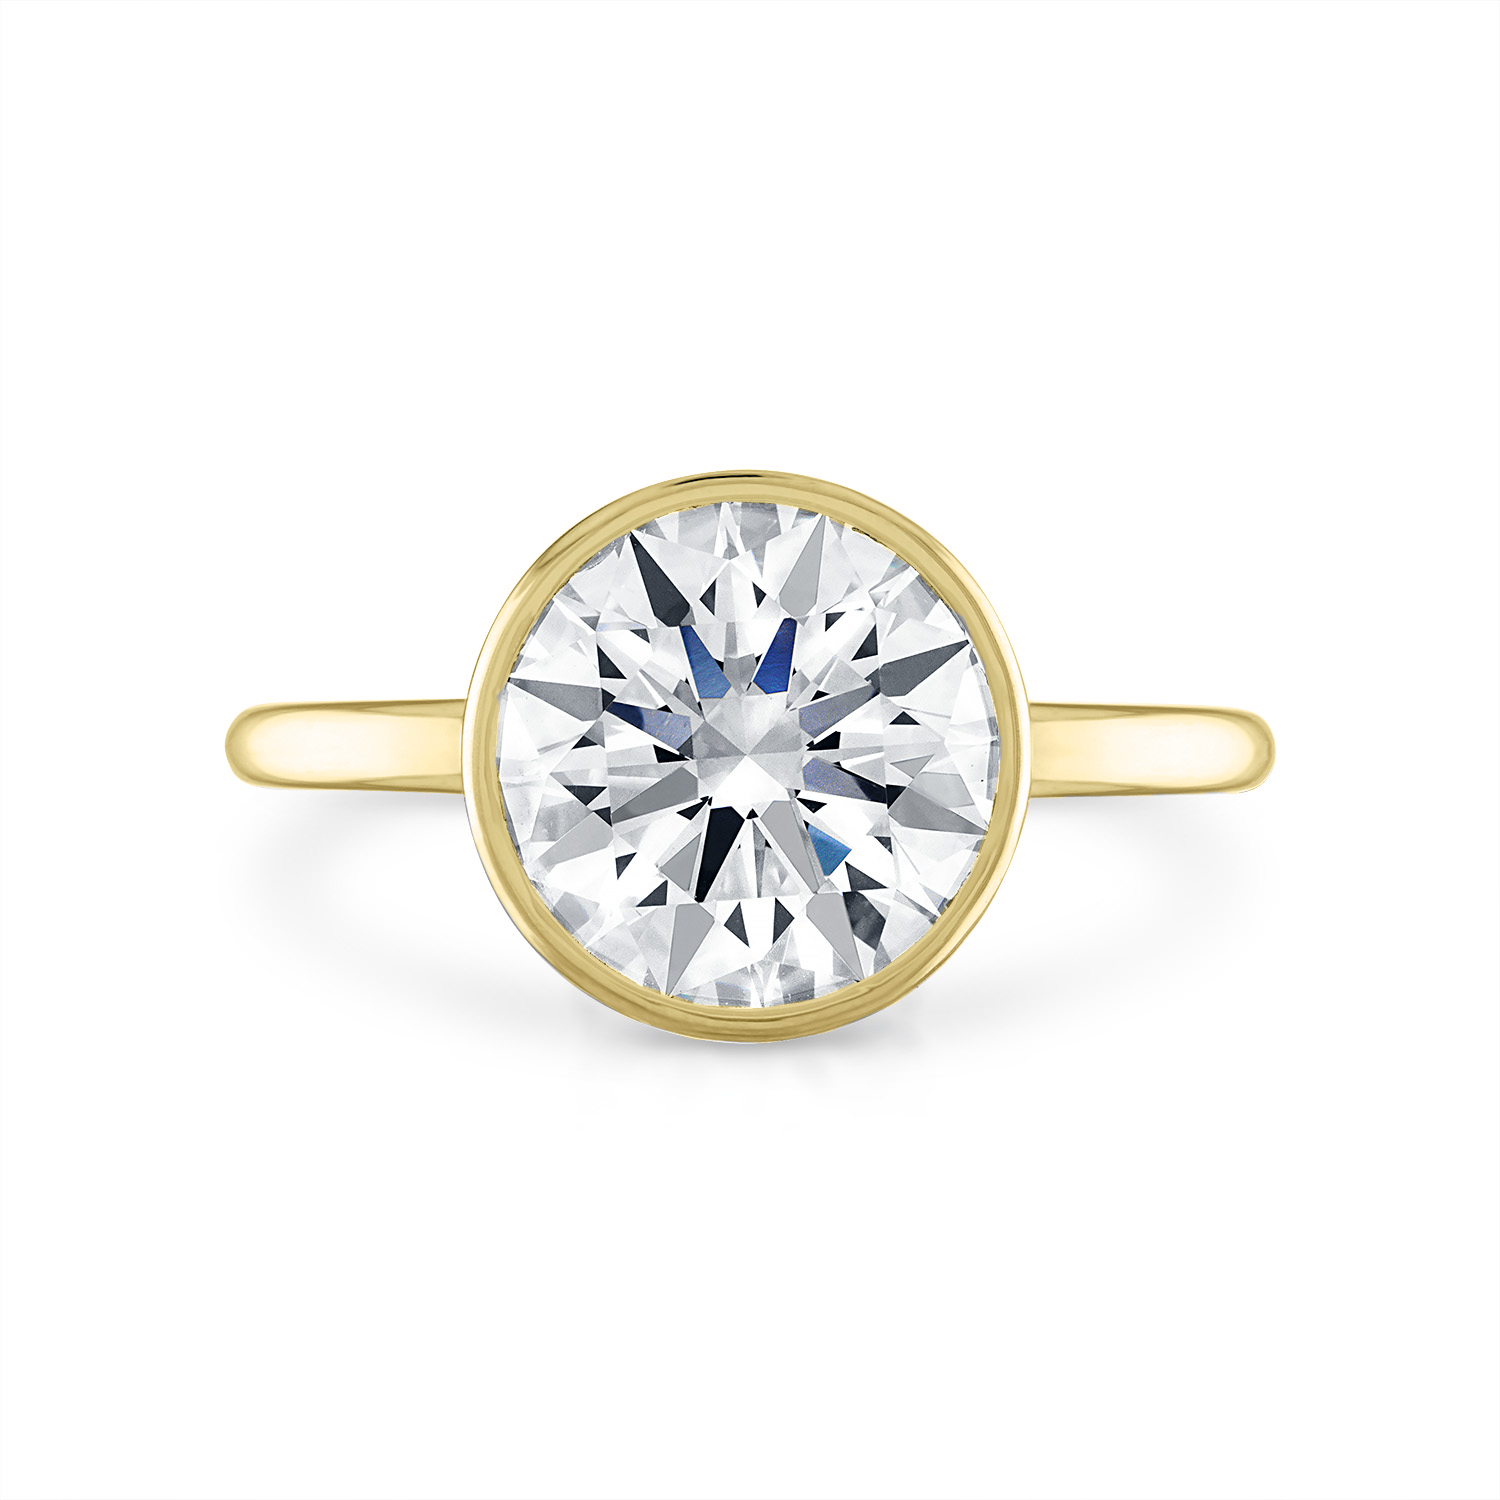 Round Bezel Engagement Ring in Yellow Gold